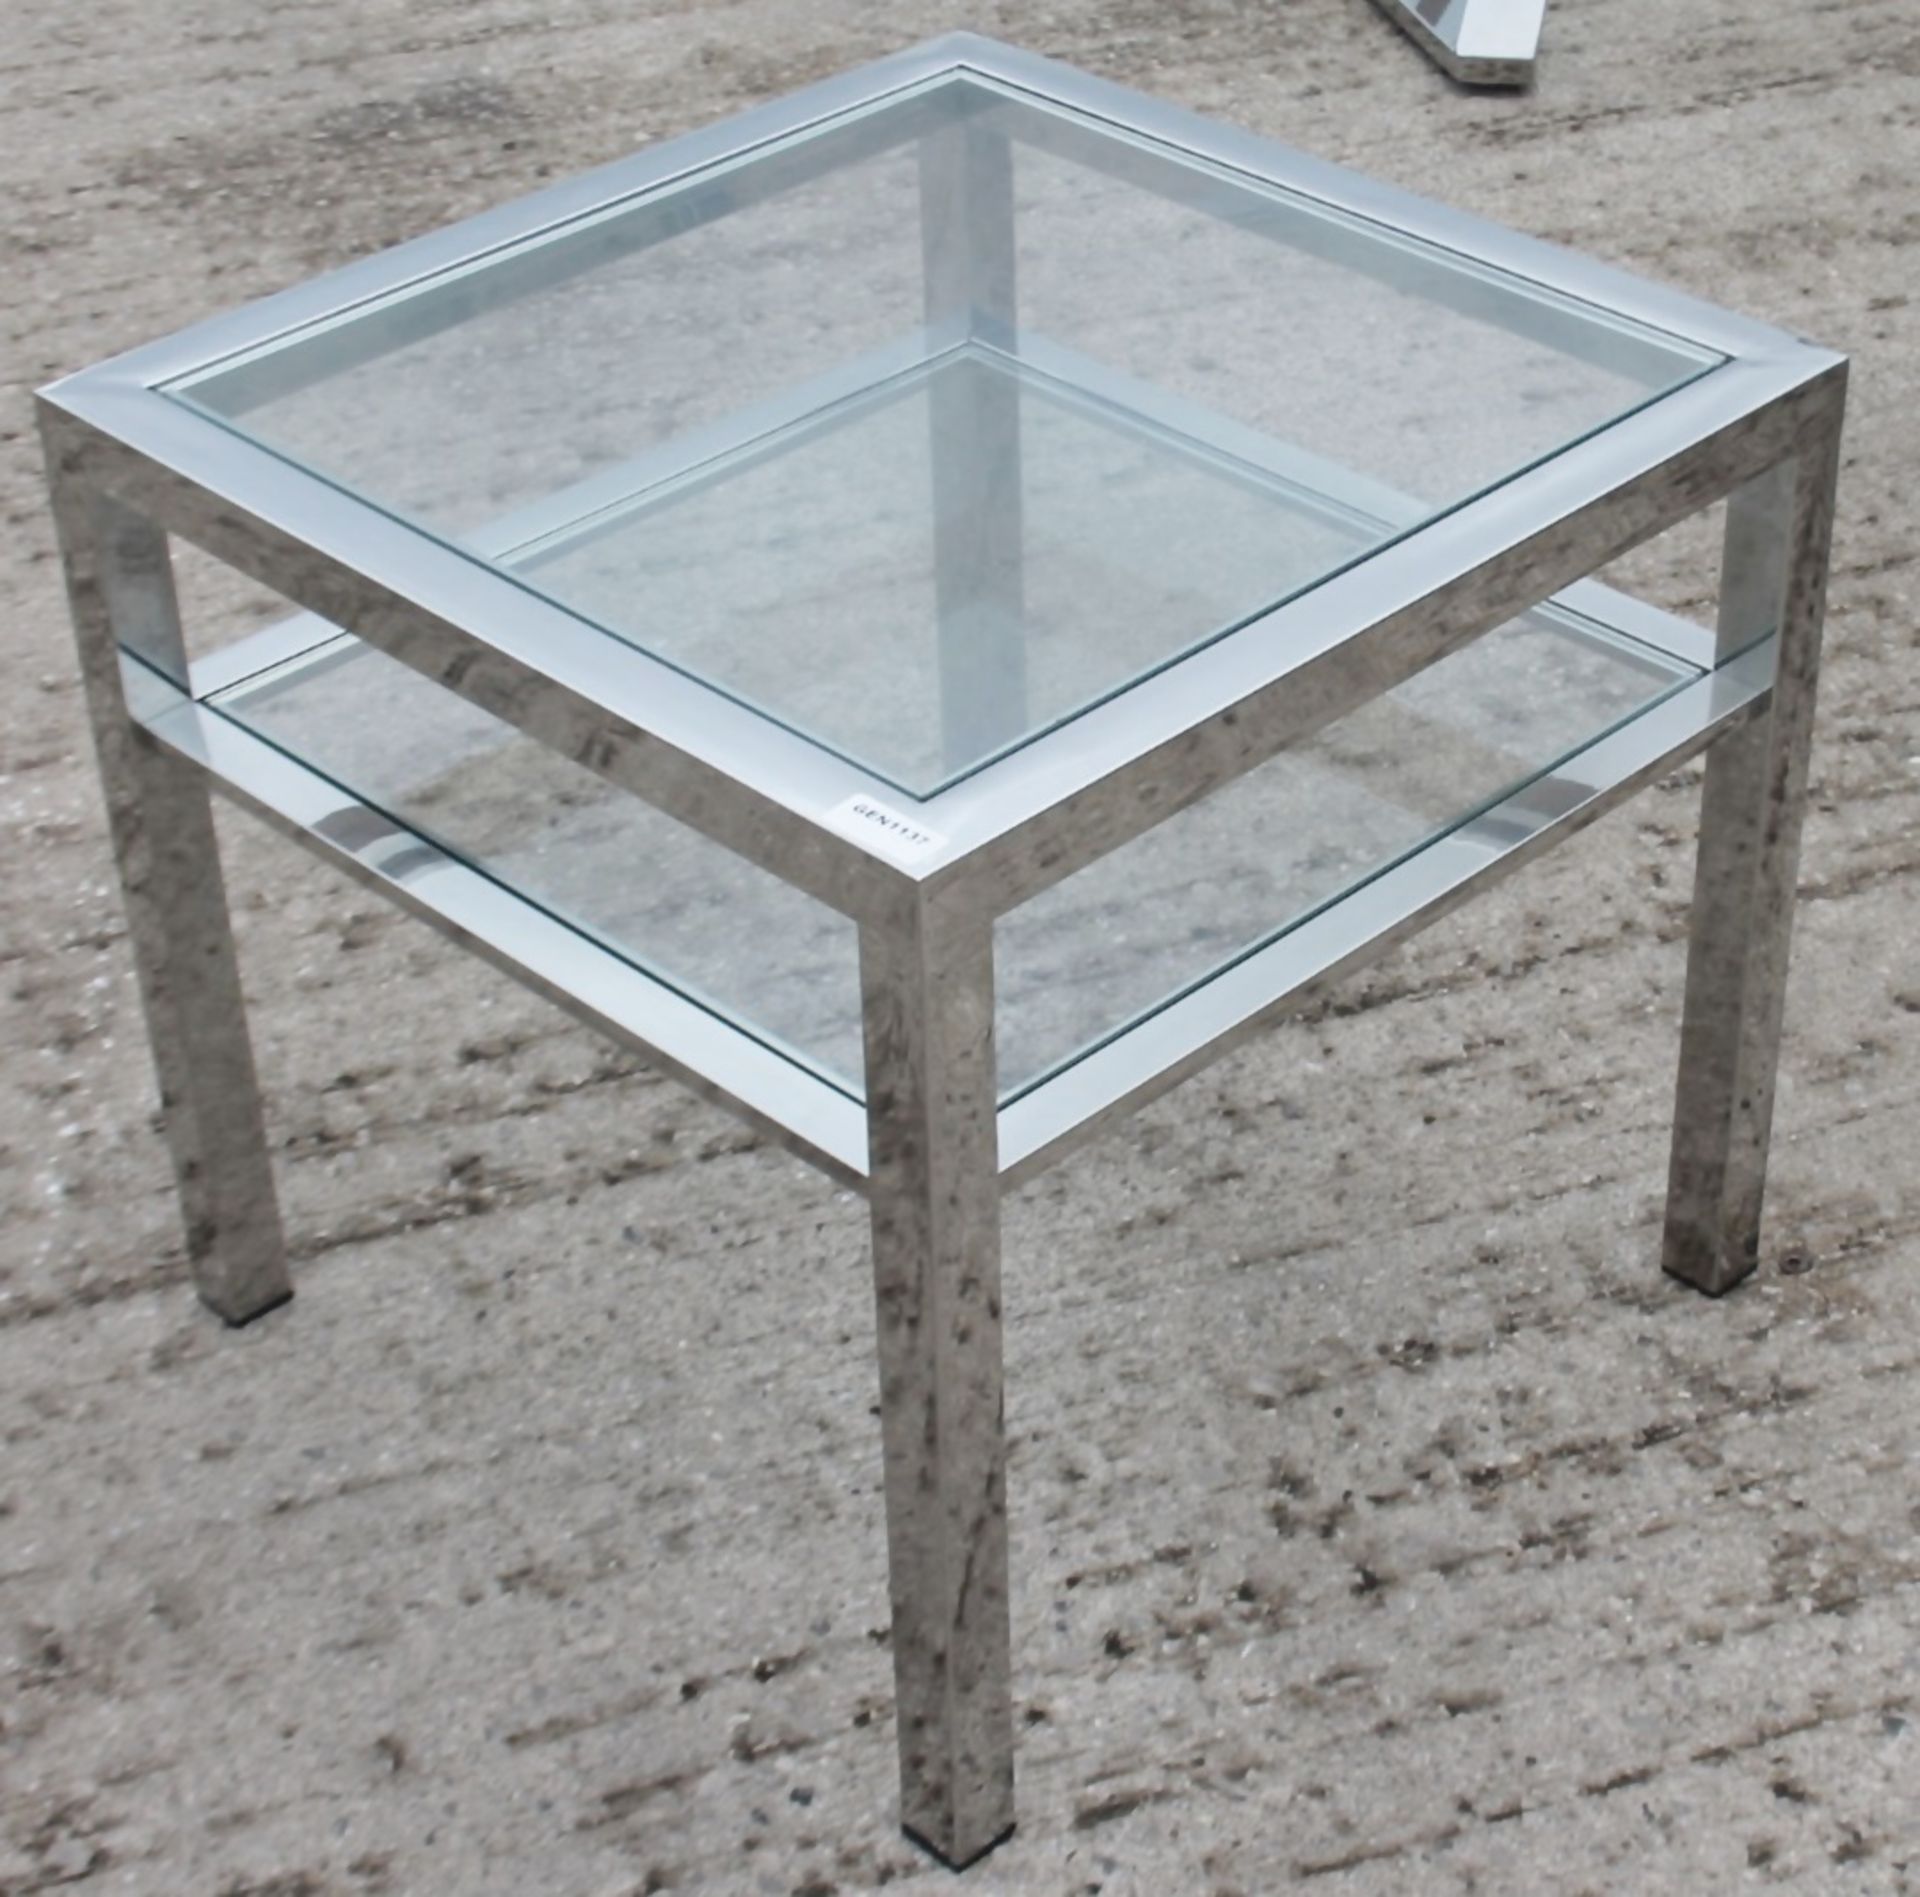 1 x Glass And Chrome Square Side Table - Original Price £200.00 - Image 3 of 3